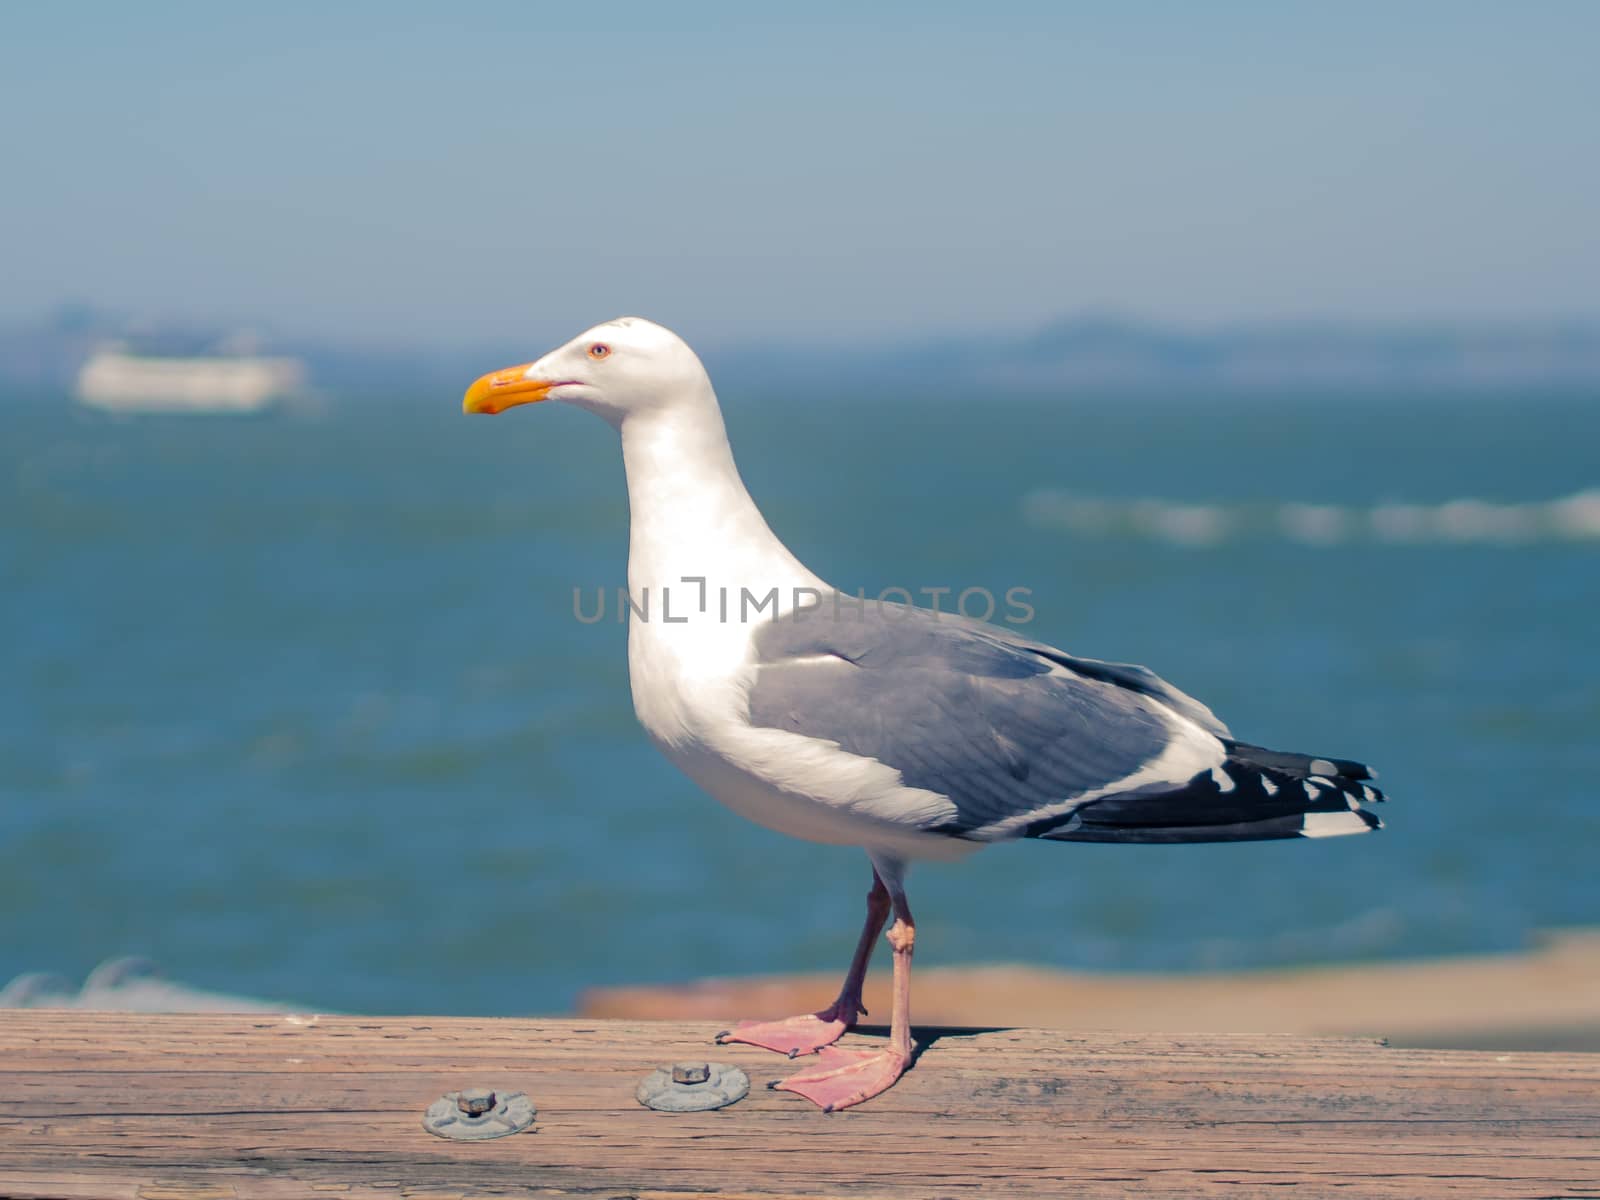 Seagull standing on the wooden rail at the harbour with blurred sea and sky in the background in warm colours